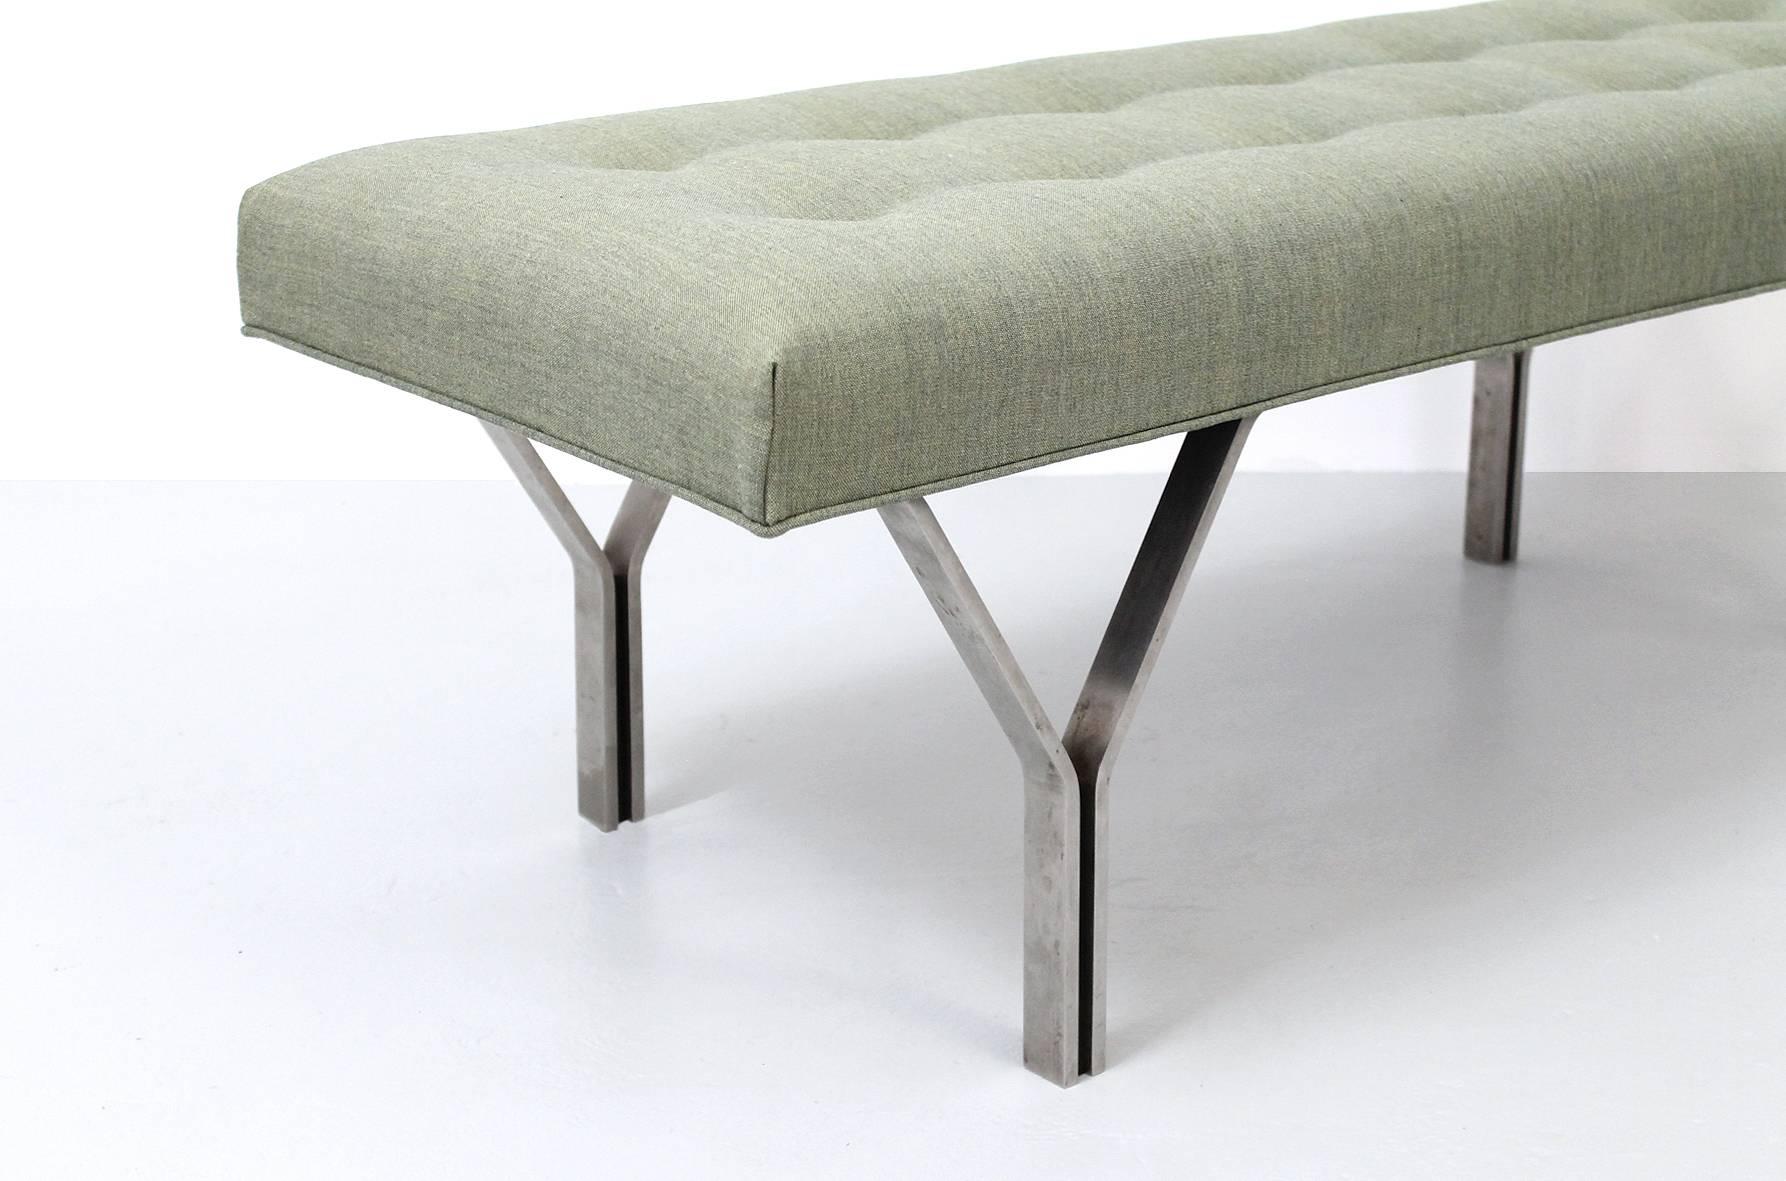 Steel Architectural Upholstered Bench by Cumberland